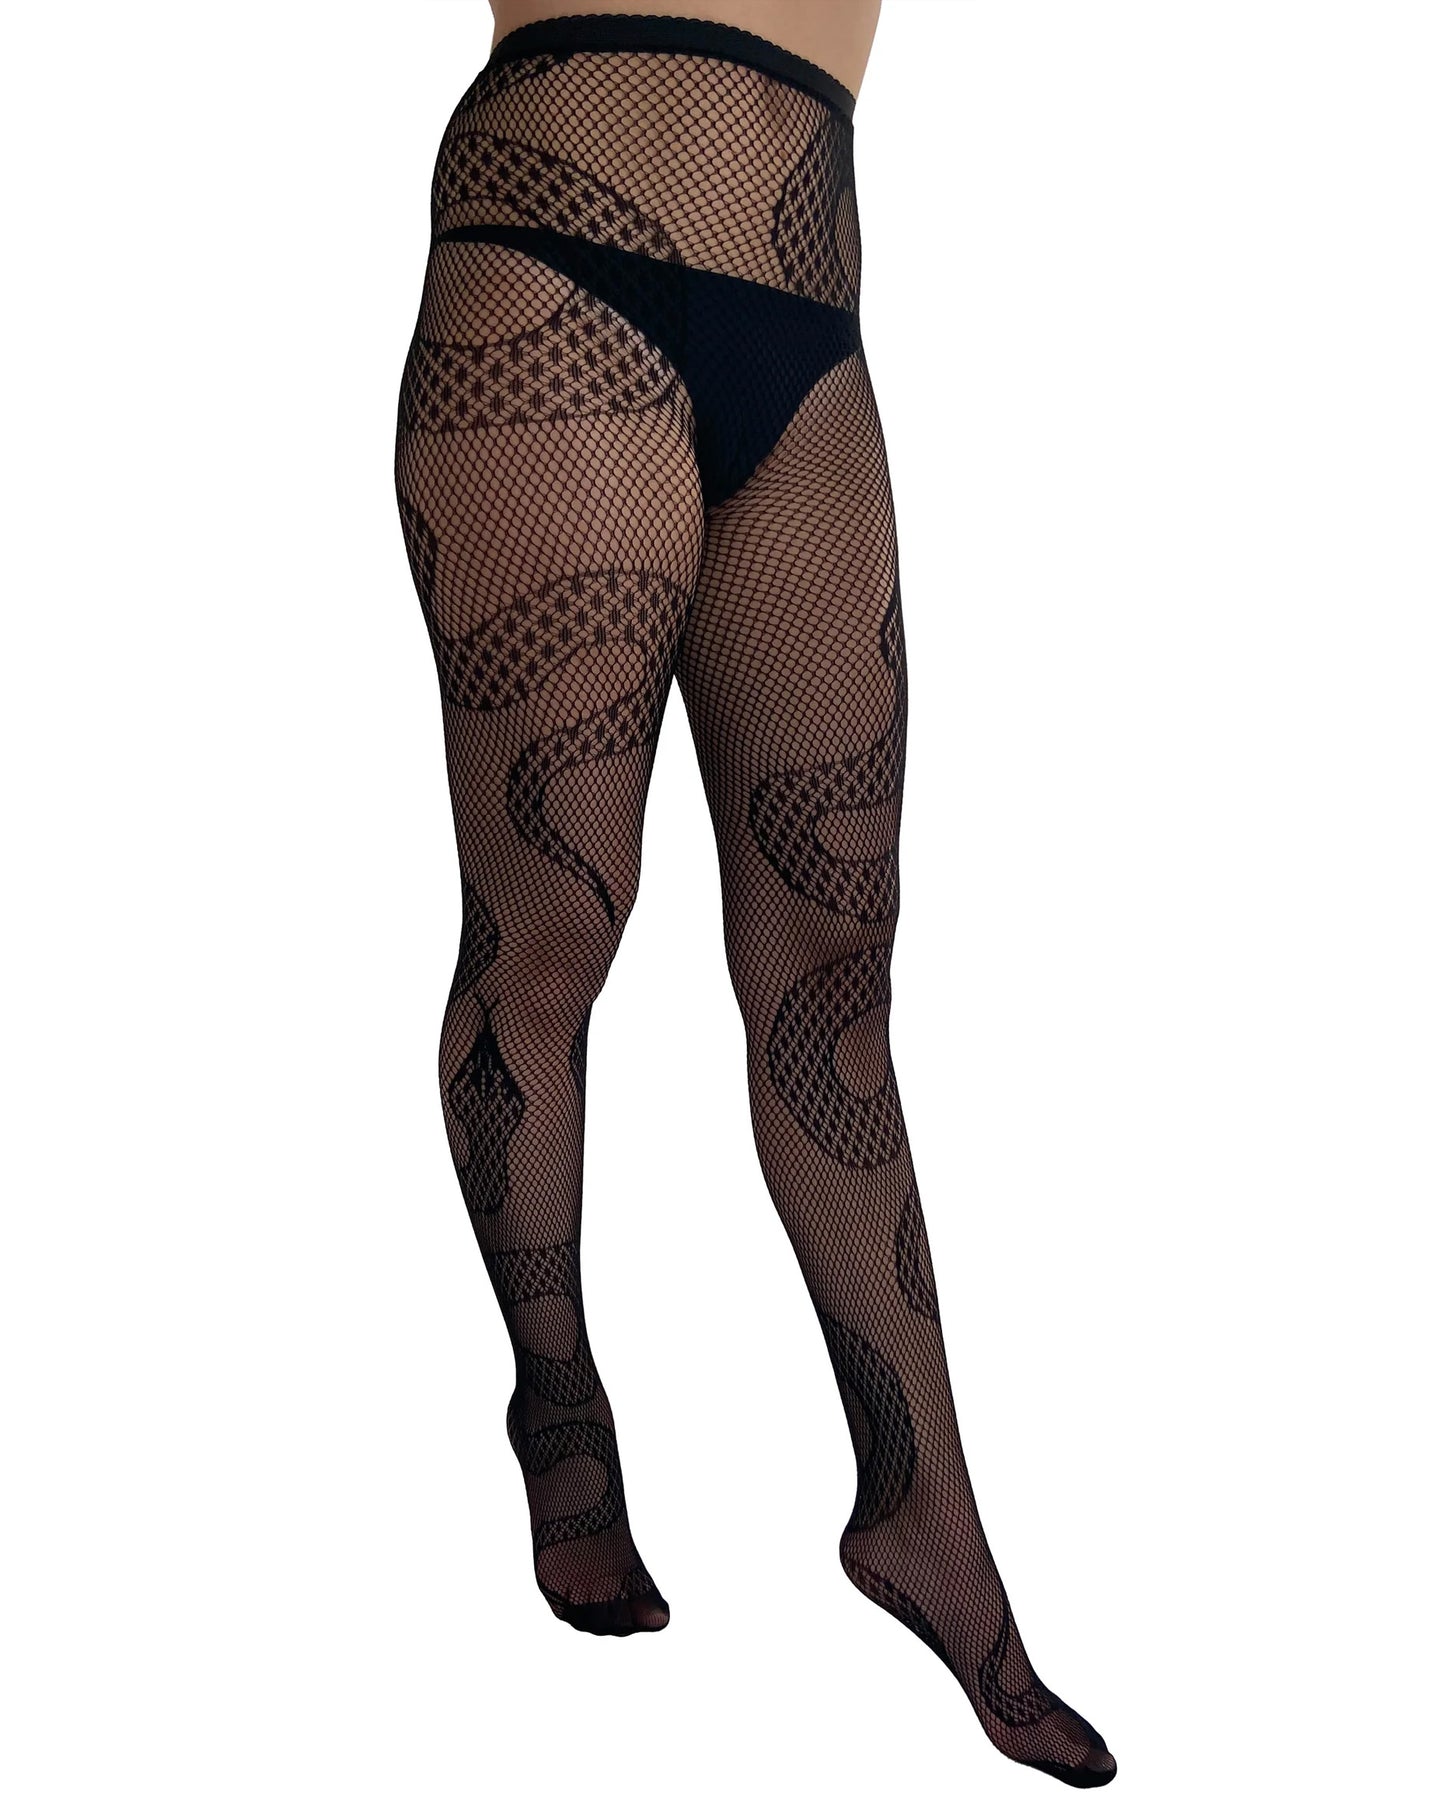 Pamela Mann Snake Net Tights - Black openwork fishnet tights with an all over snake design and seamless body.